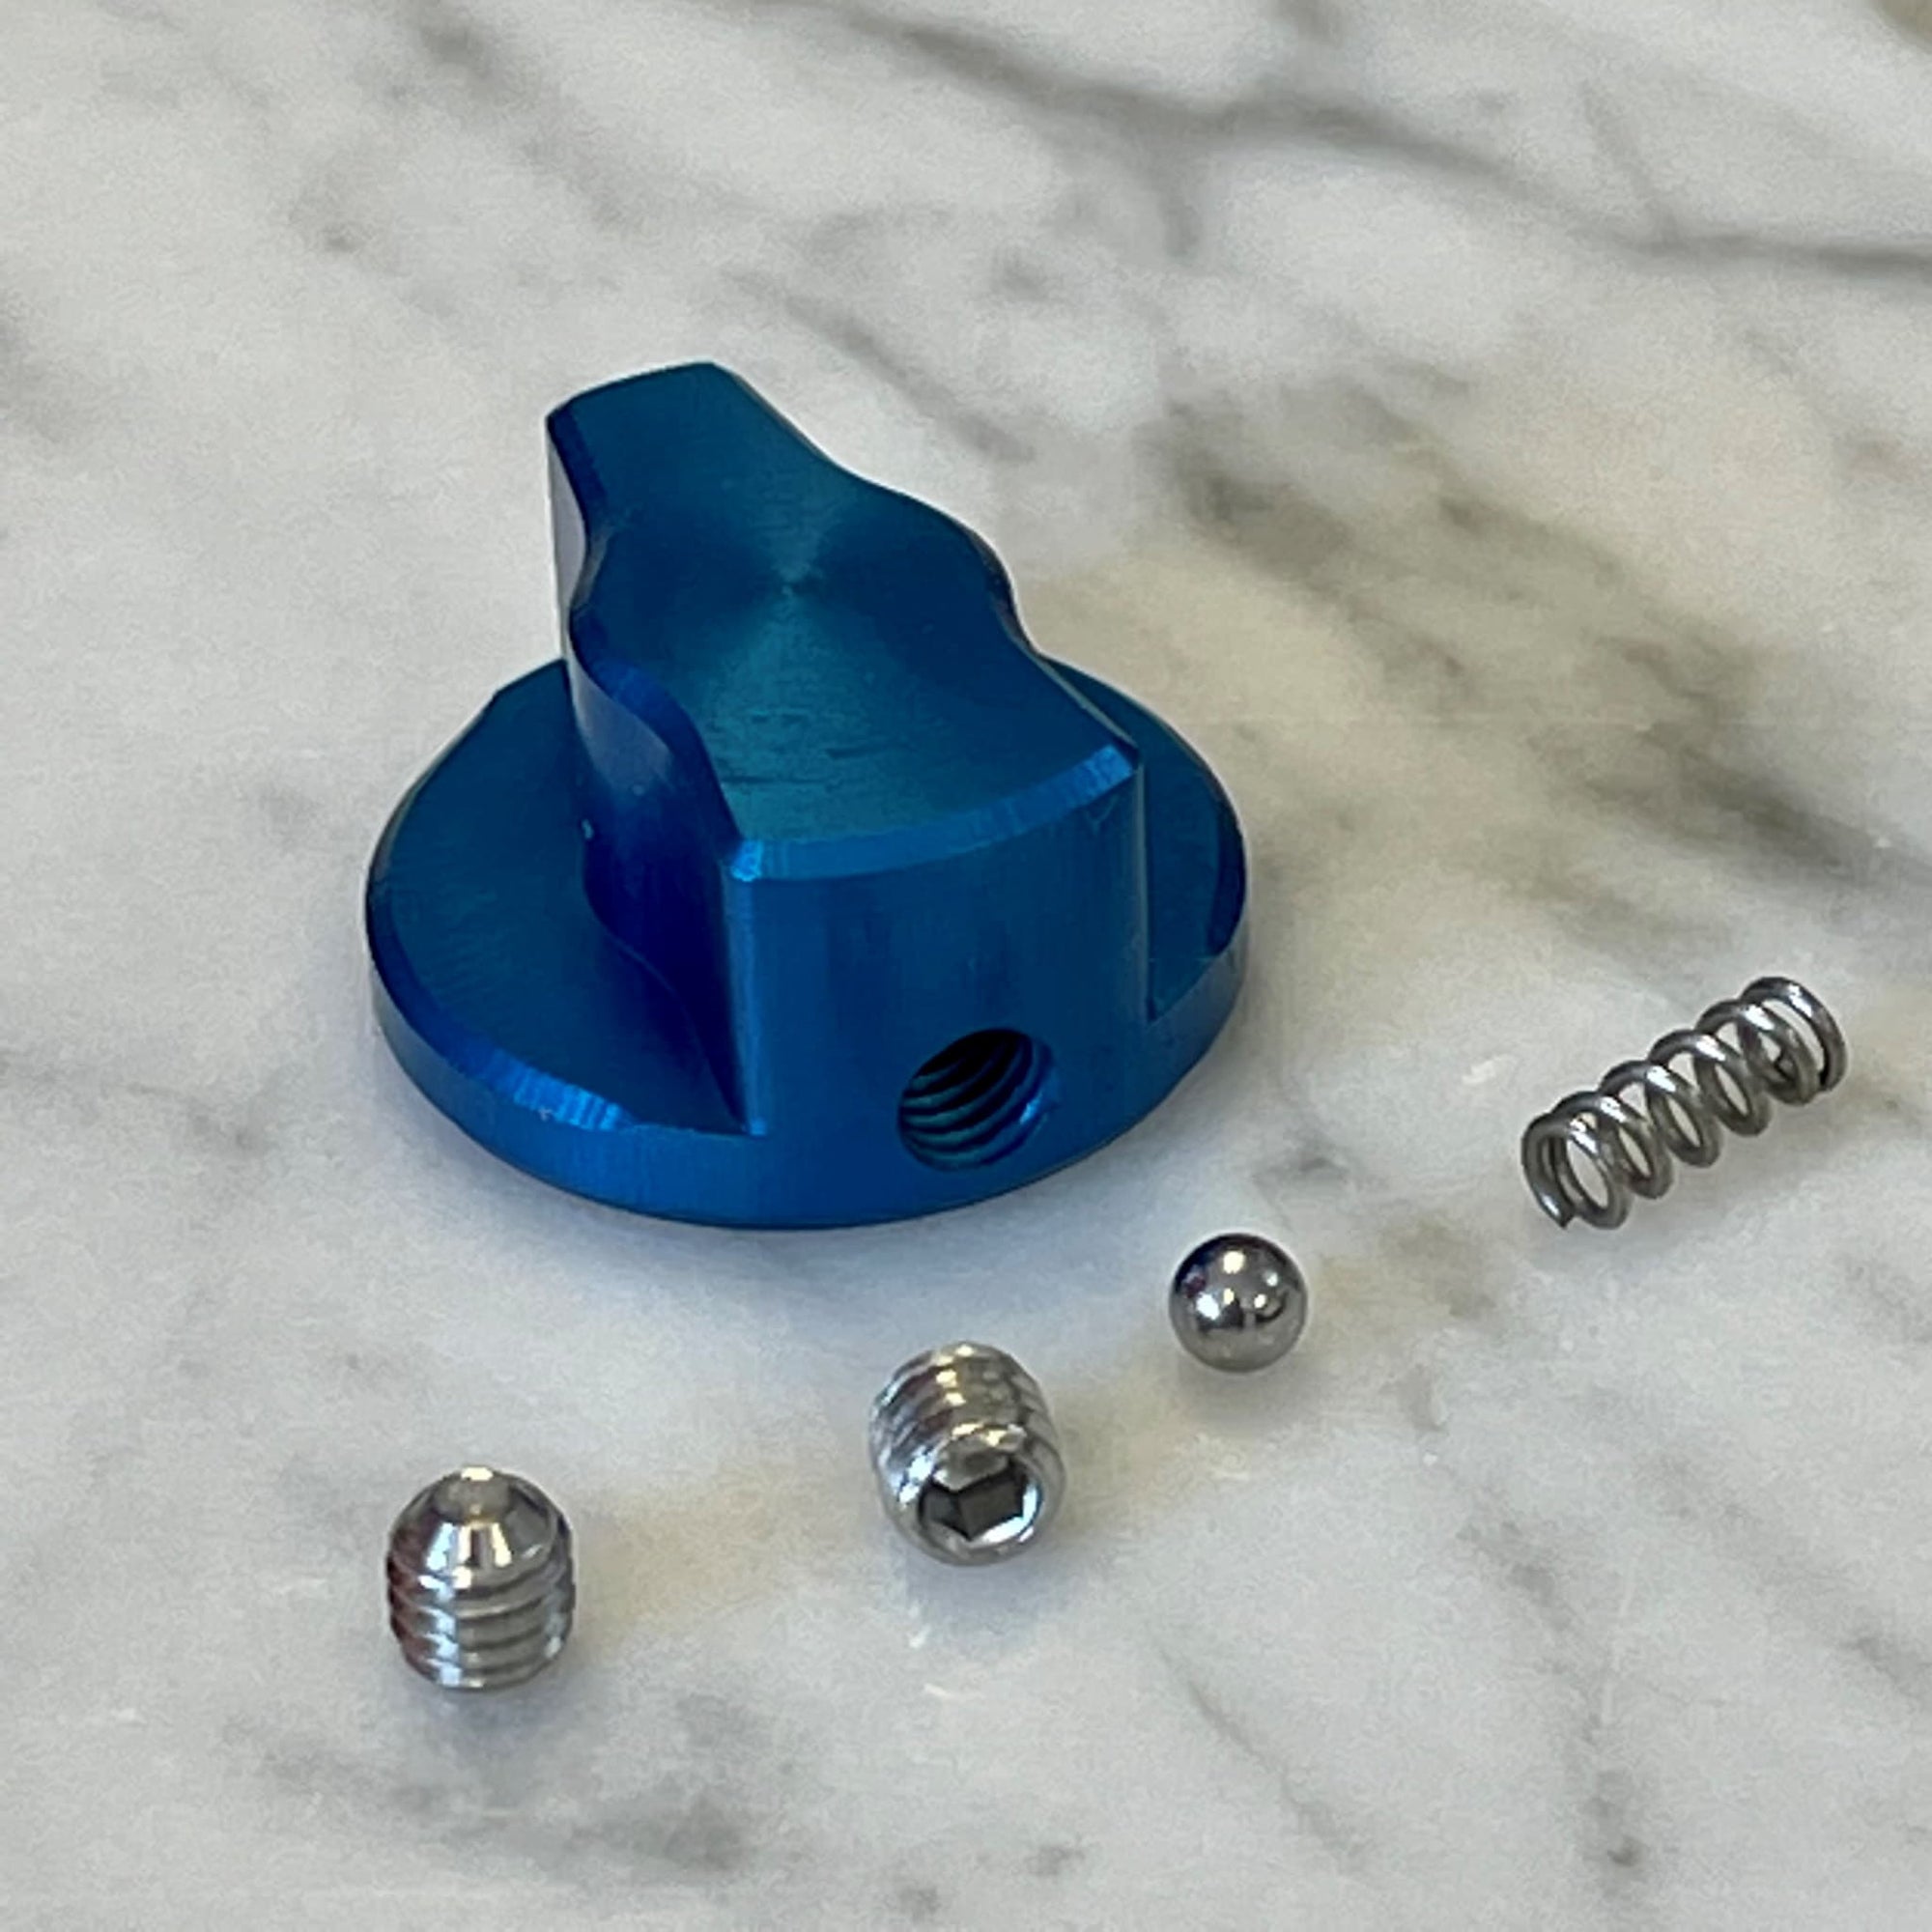 Blue Adjuster Knob for RM3, Axis, and VectorMX Steering Dampers Motocycle Steering Dampers MSC Moto 